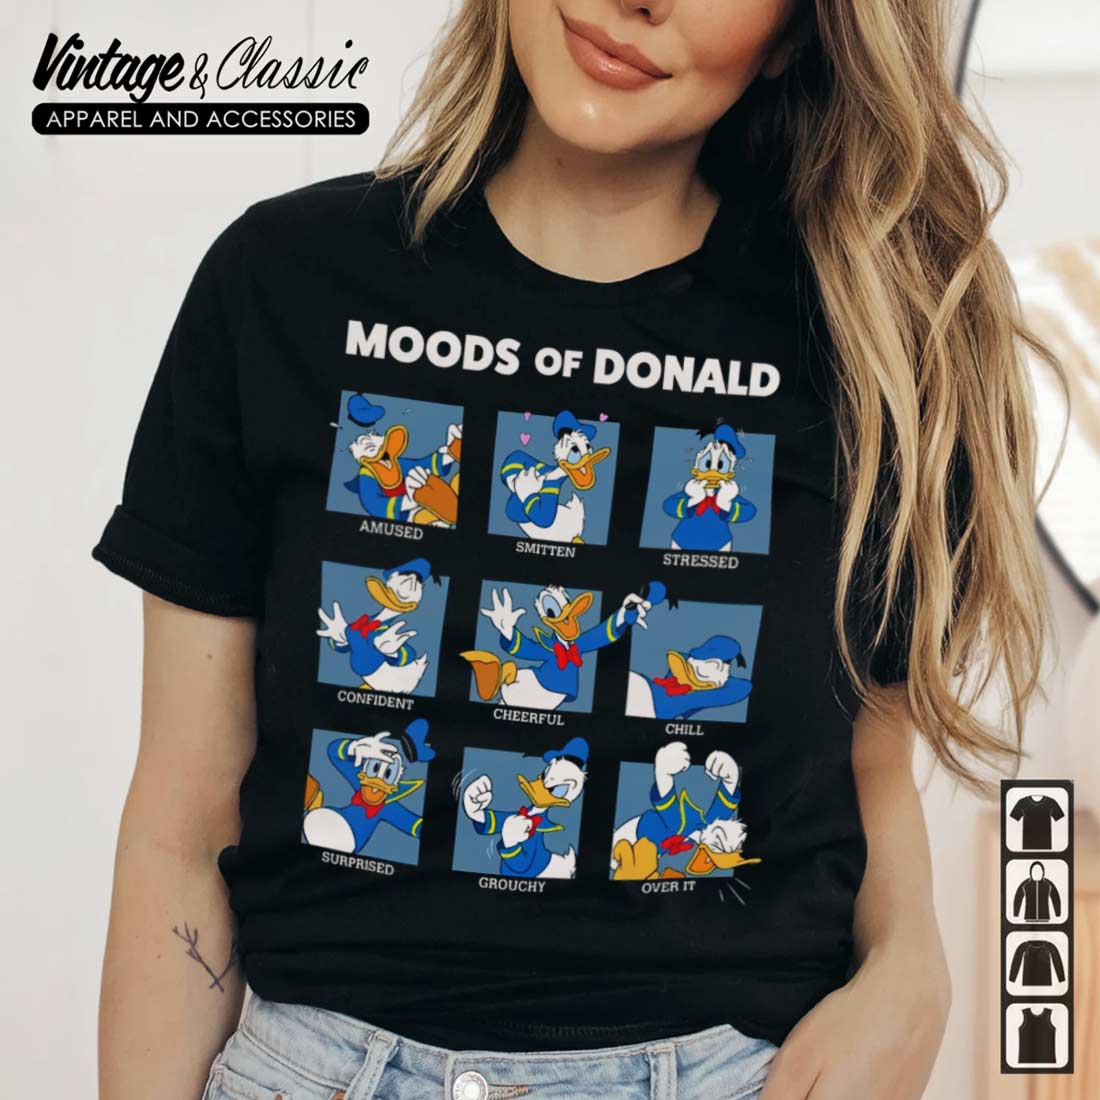 Moods Of Duck, Funny Donald Shirt Donald - Face Vintagenclassic Tee